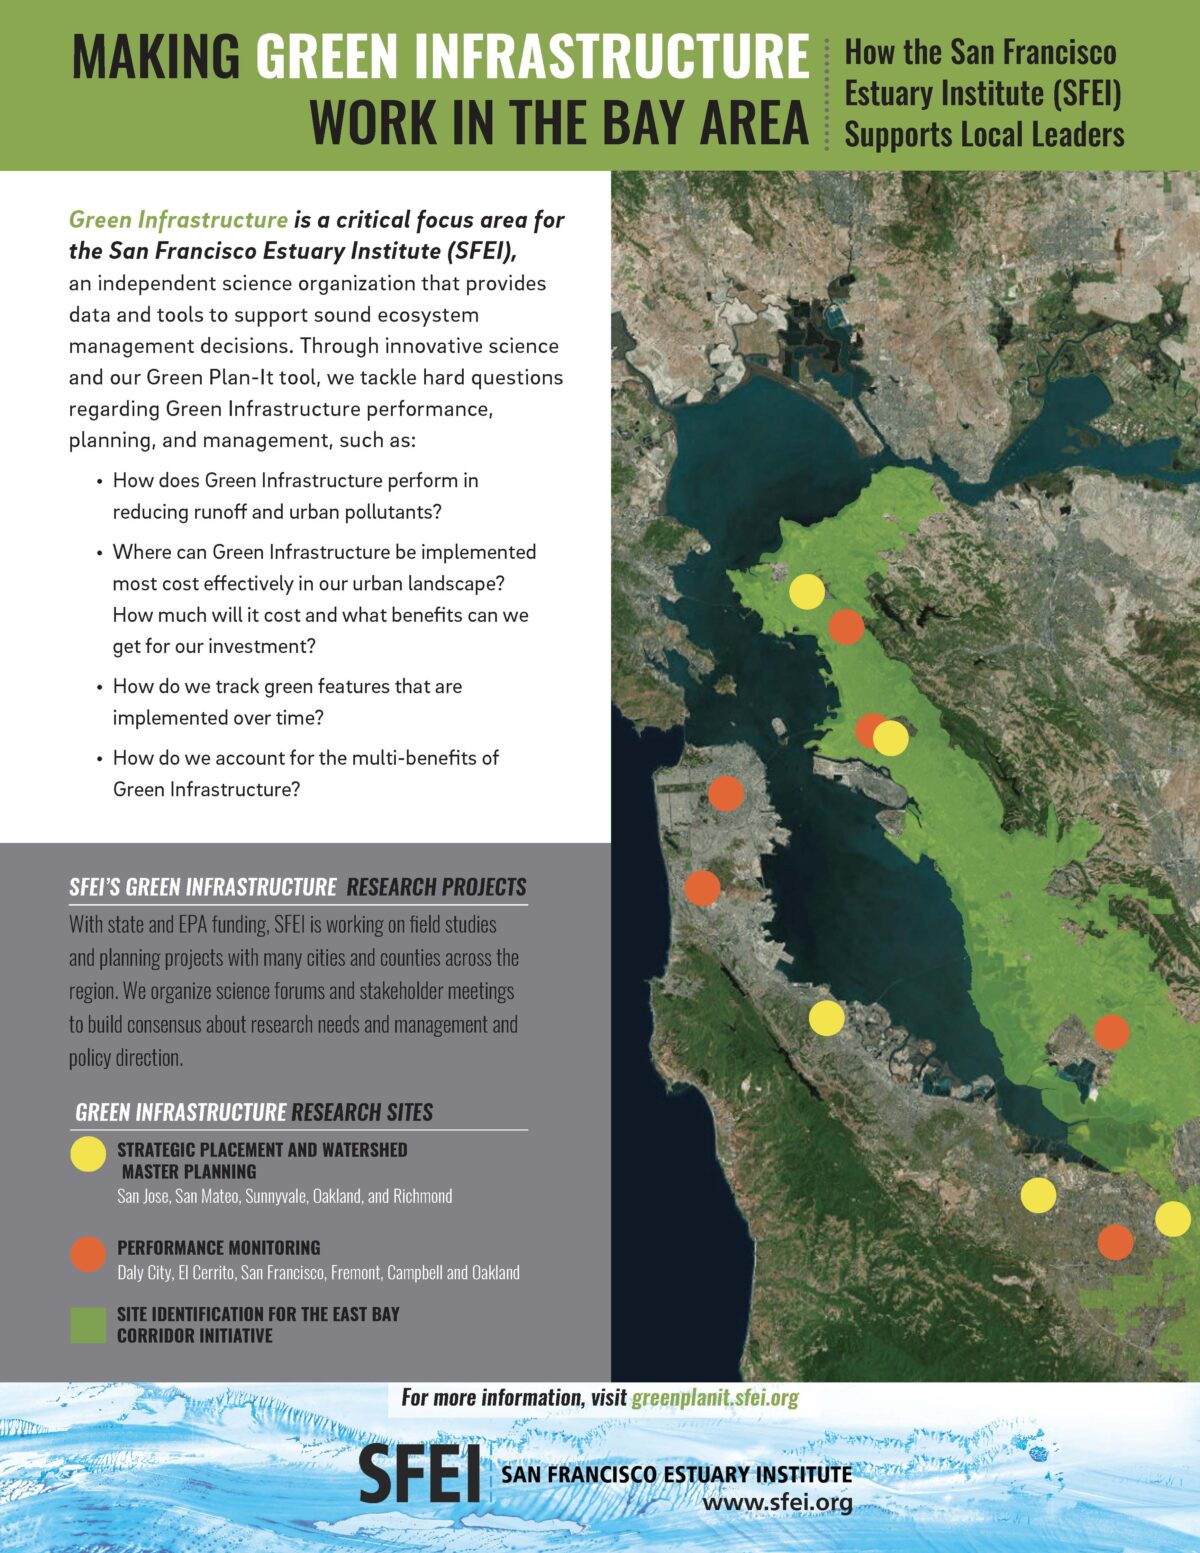 Making Green Infrastructure Work in the Bay Area